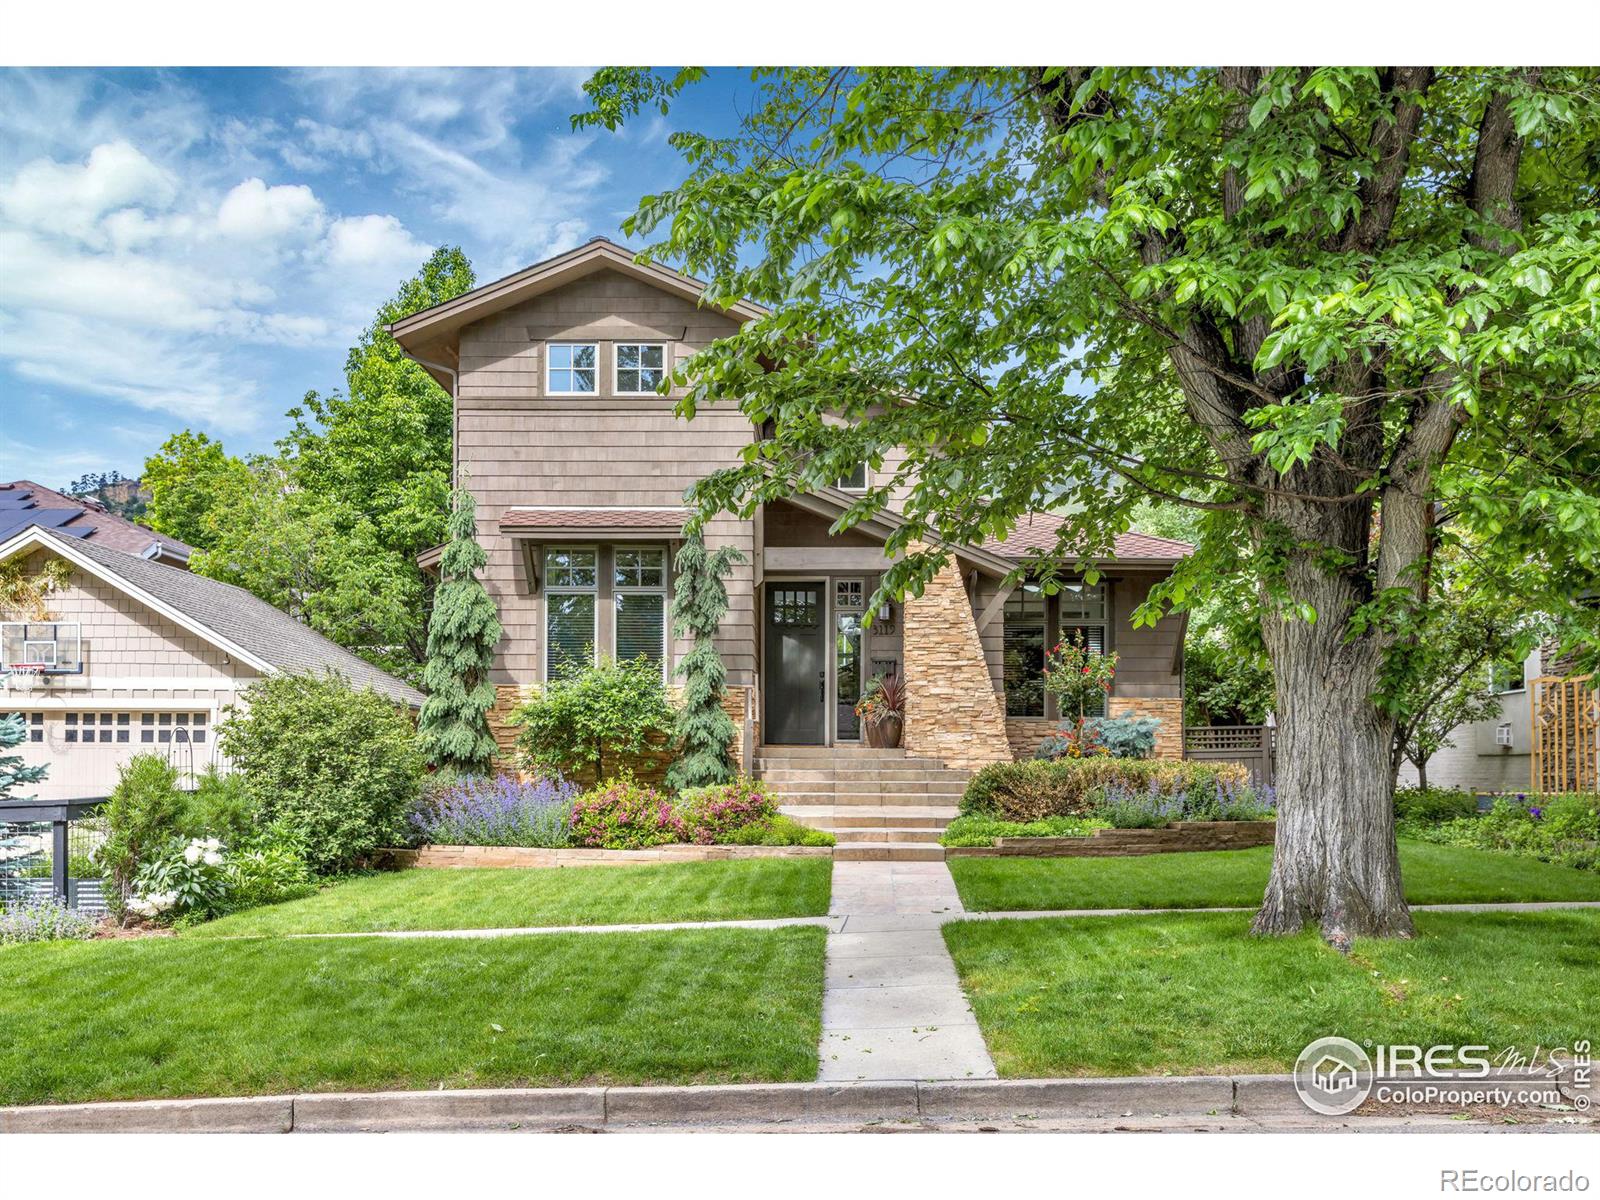 3119  8th street, boulder sold home. Closed on 2024-01-03 for $2,610,000.